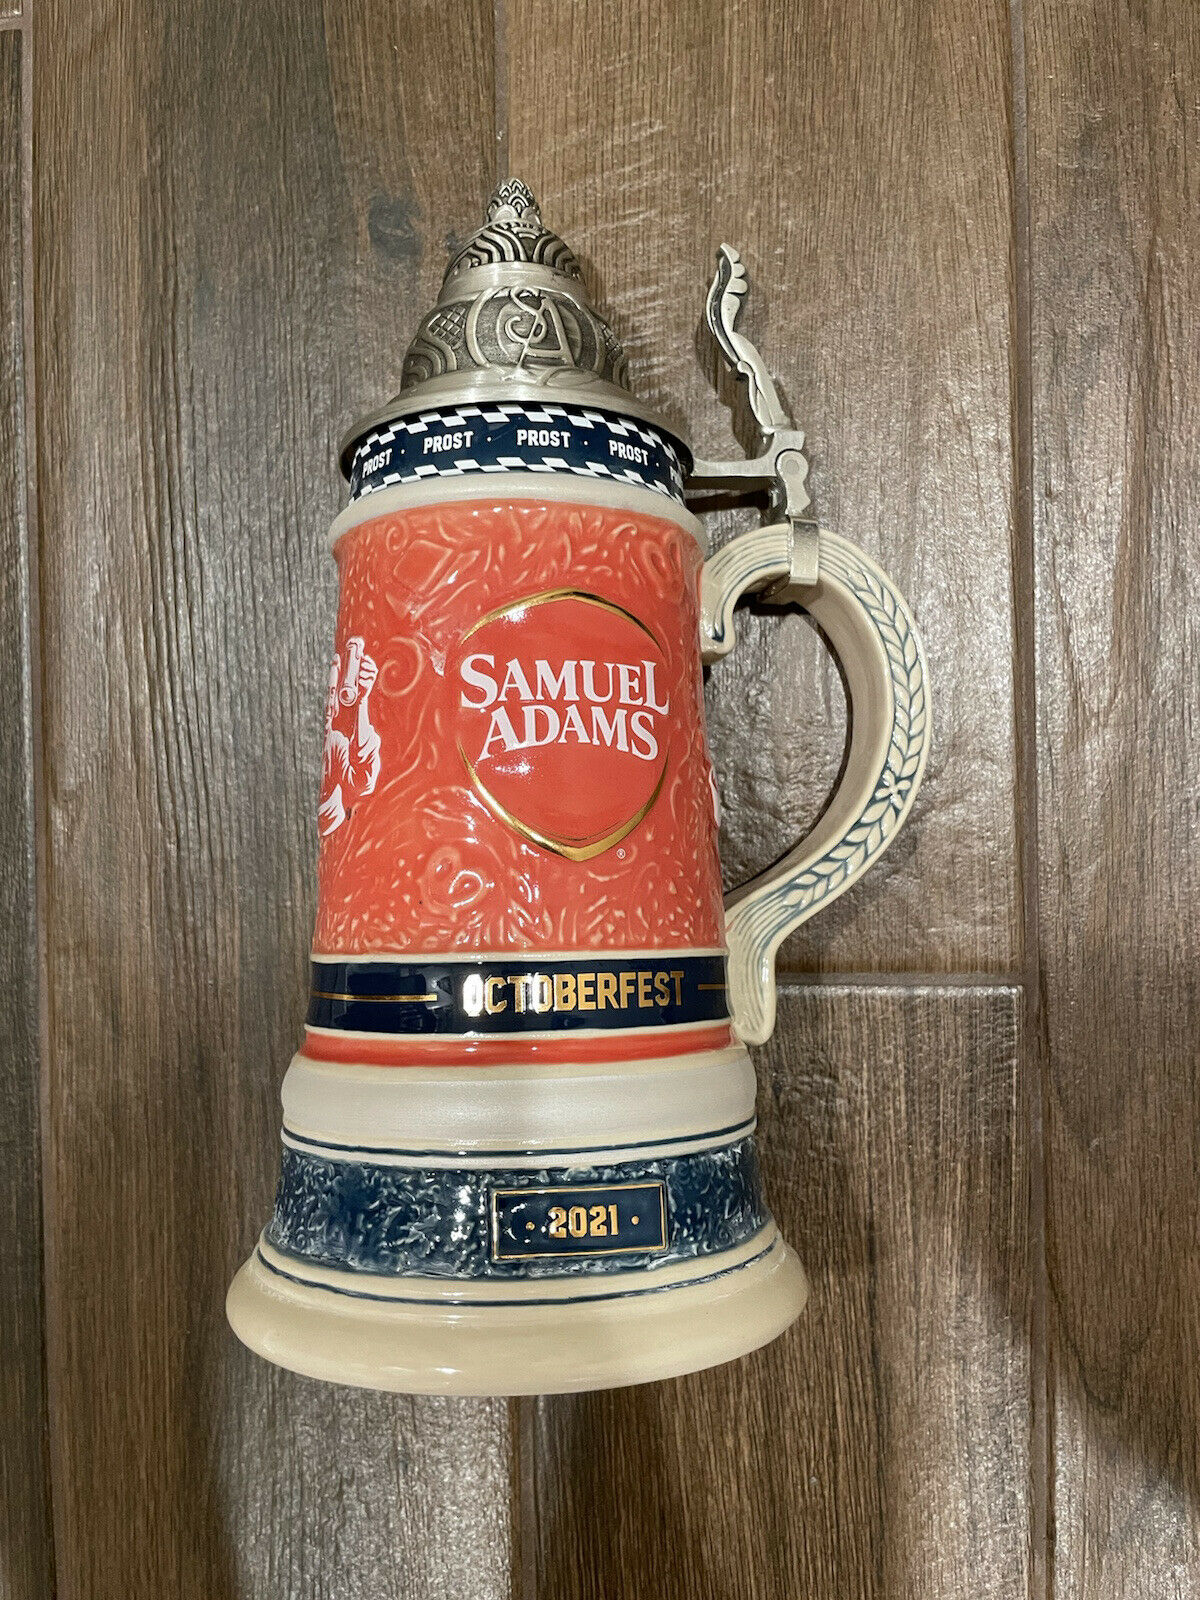 2021 Sam Adams Beer Lidded Stein Octoberfest New In Box Limited Edition Numbered